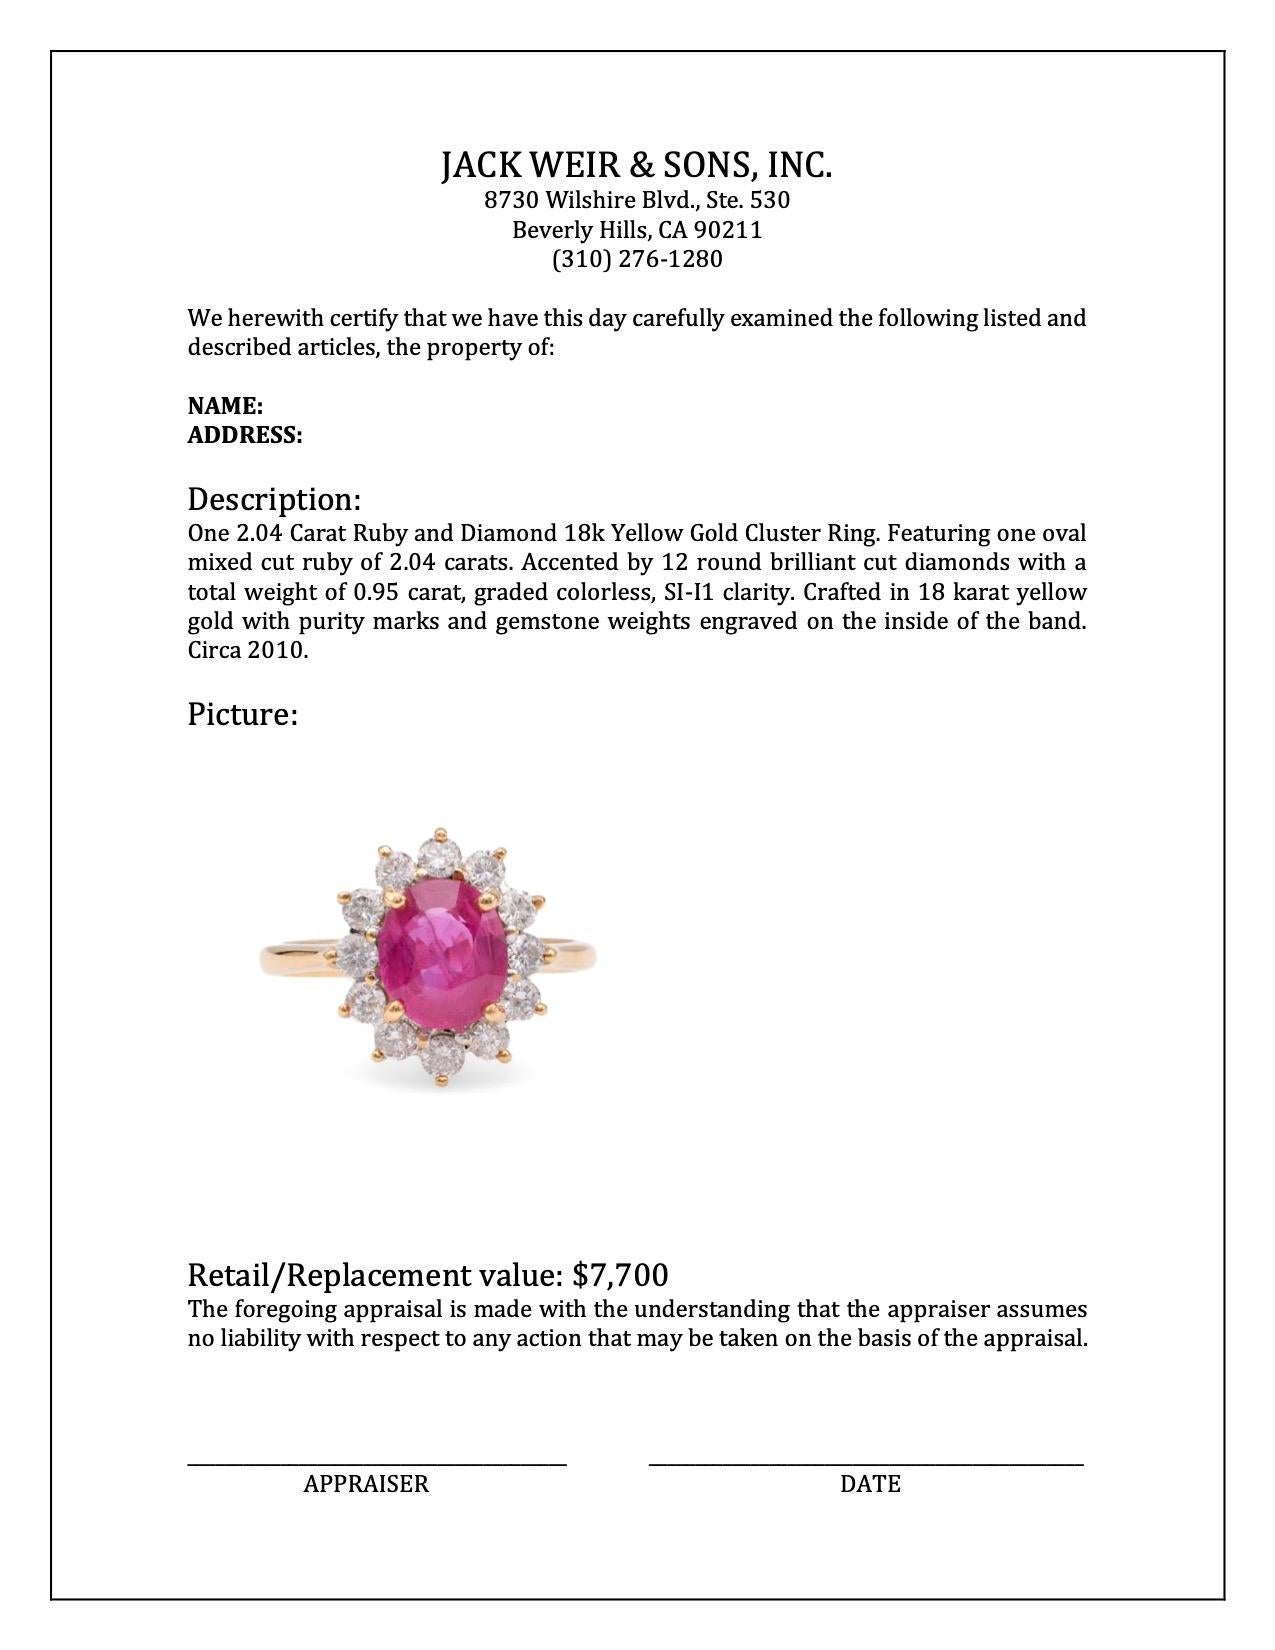 2.04 Carat Ruby and Diamond 18k Yellow Gold Cluster Ring For Sale 1